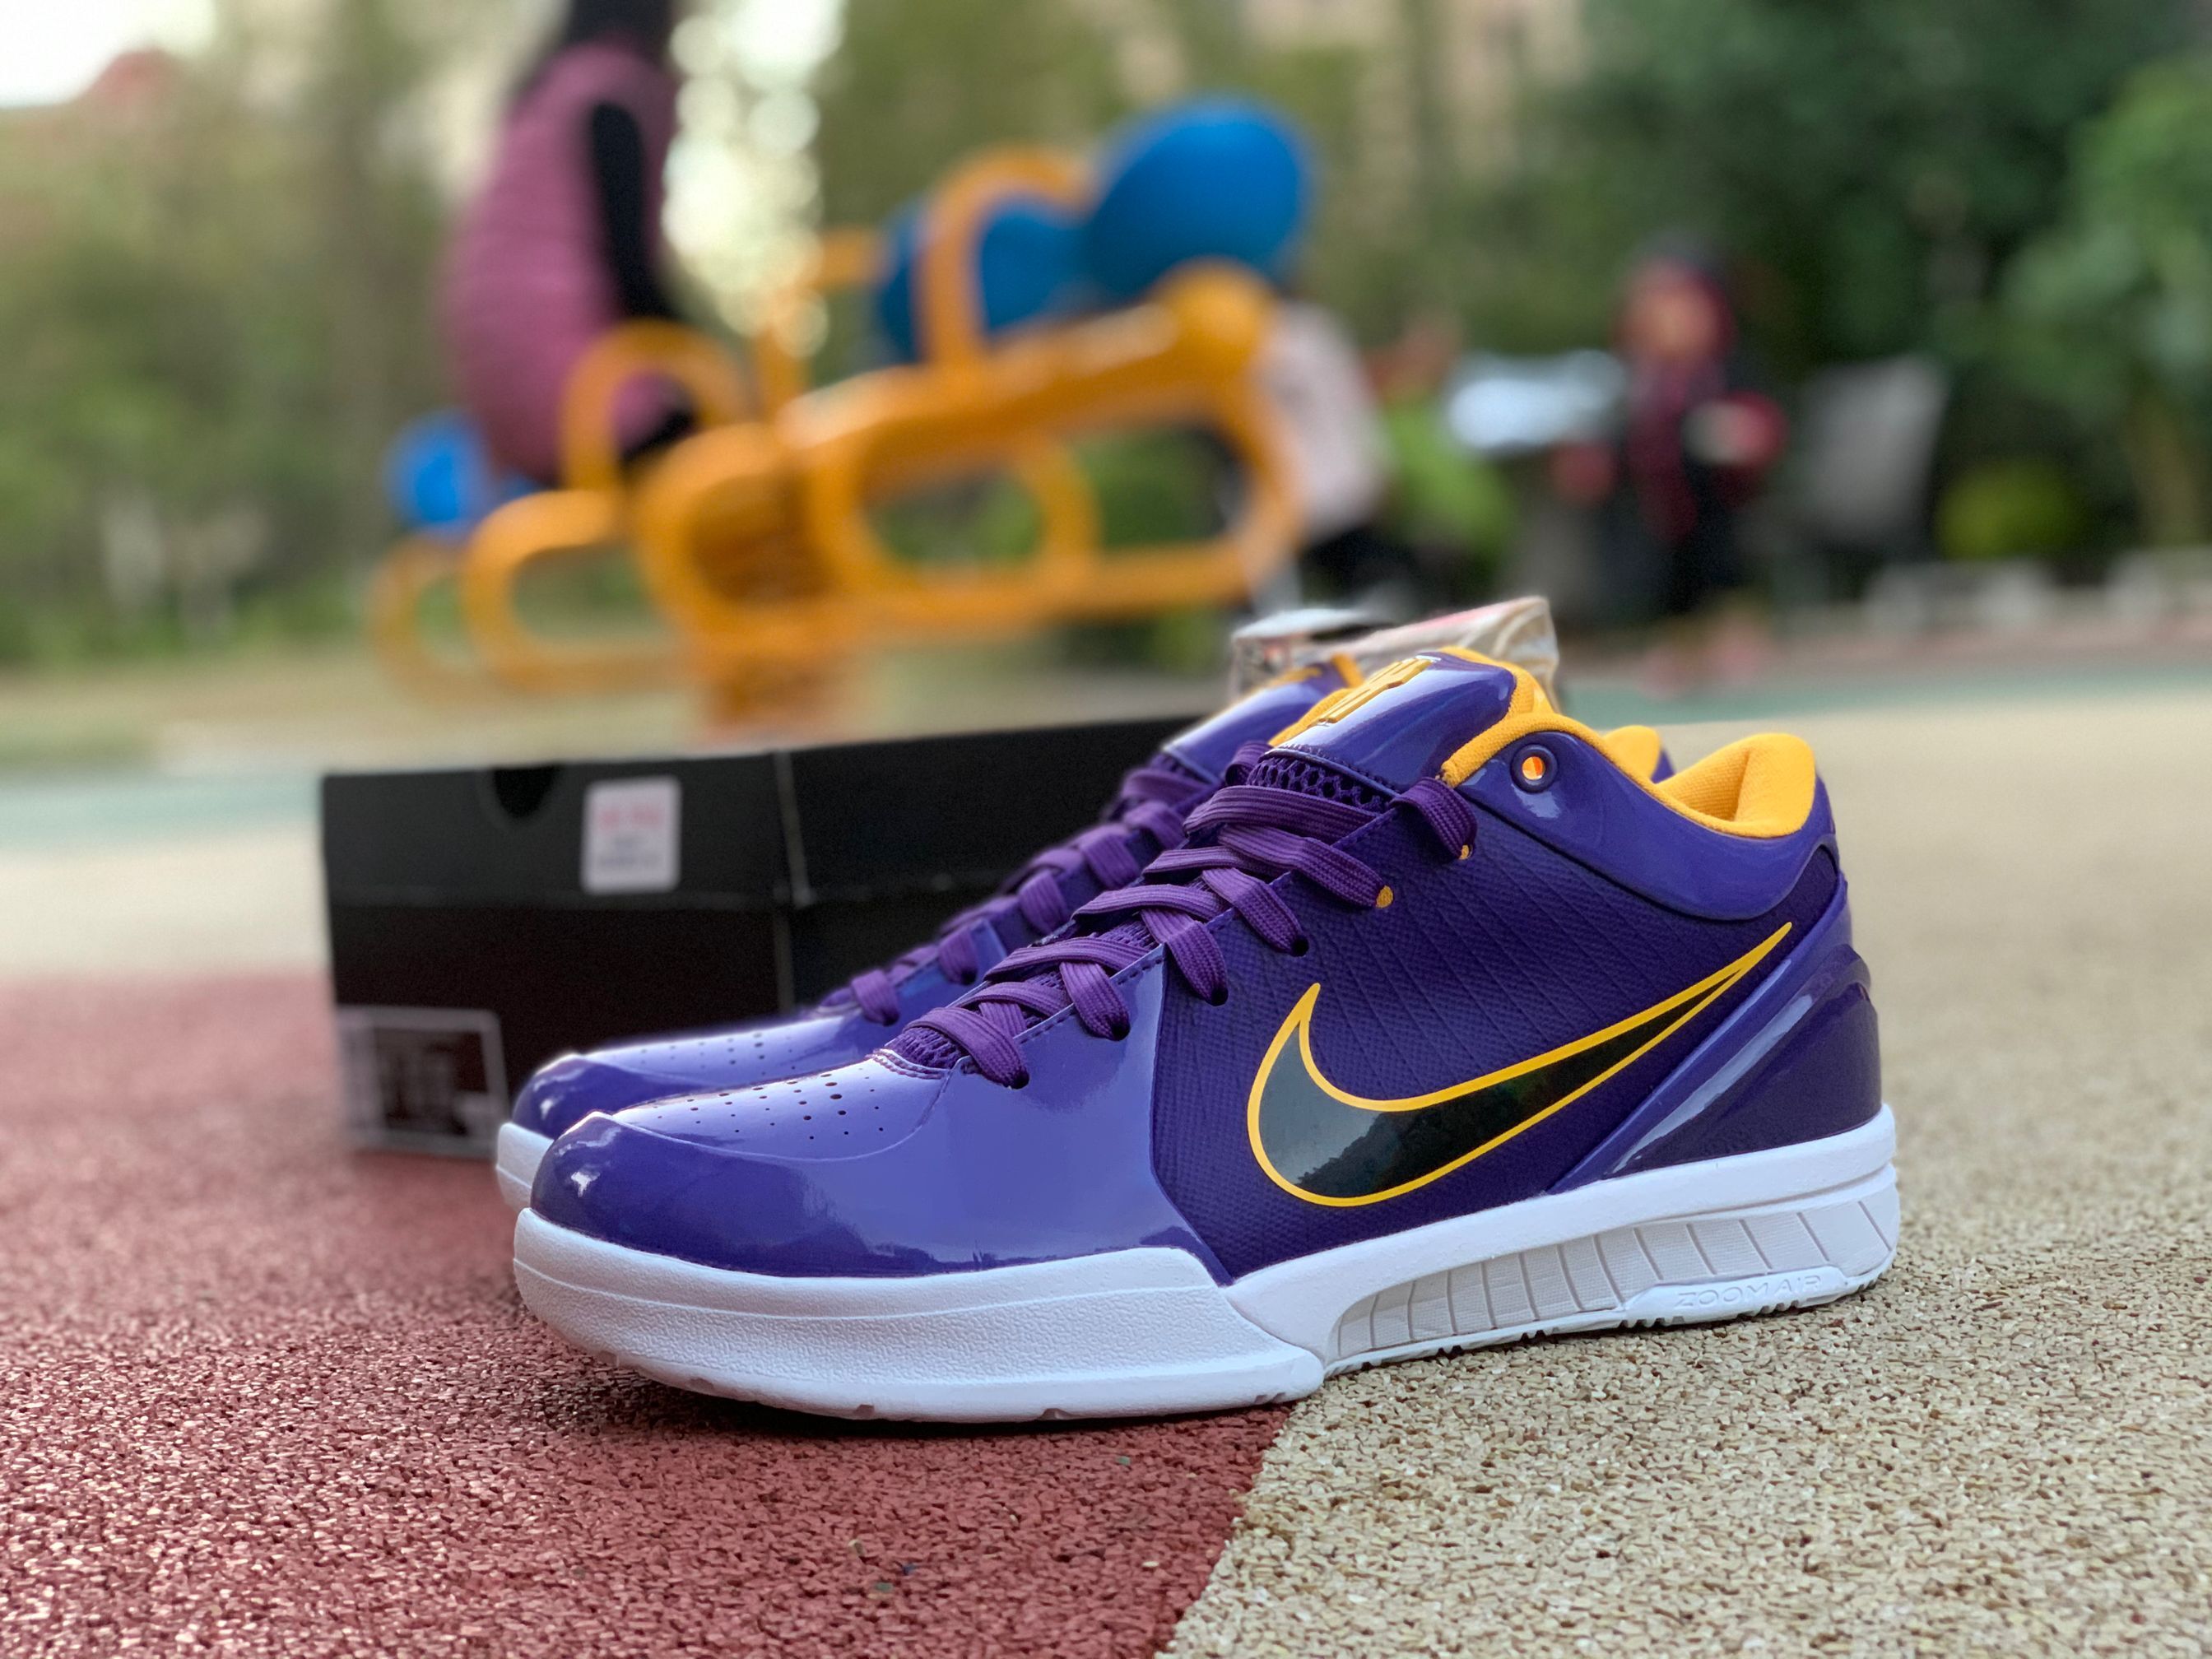 Cheap Undefeated x Nike Zoom Kobe 4 Protro “Lakers” CQ3869-500 For Sale